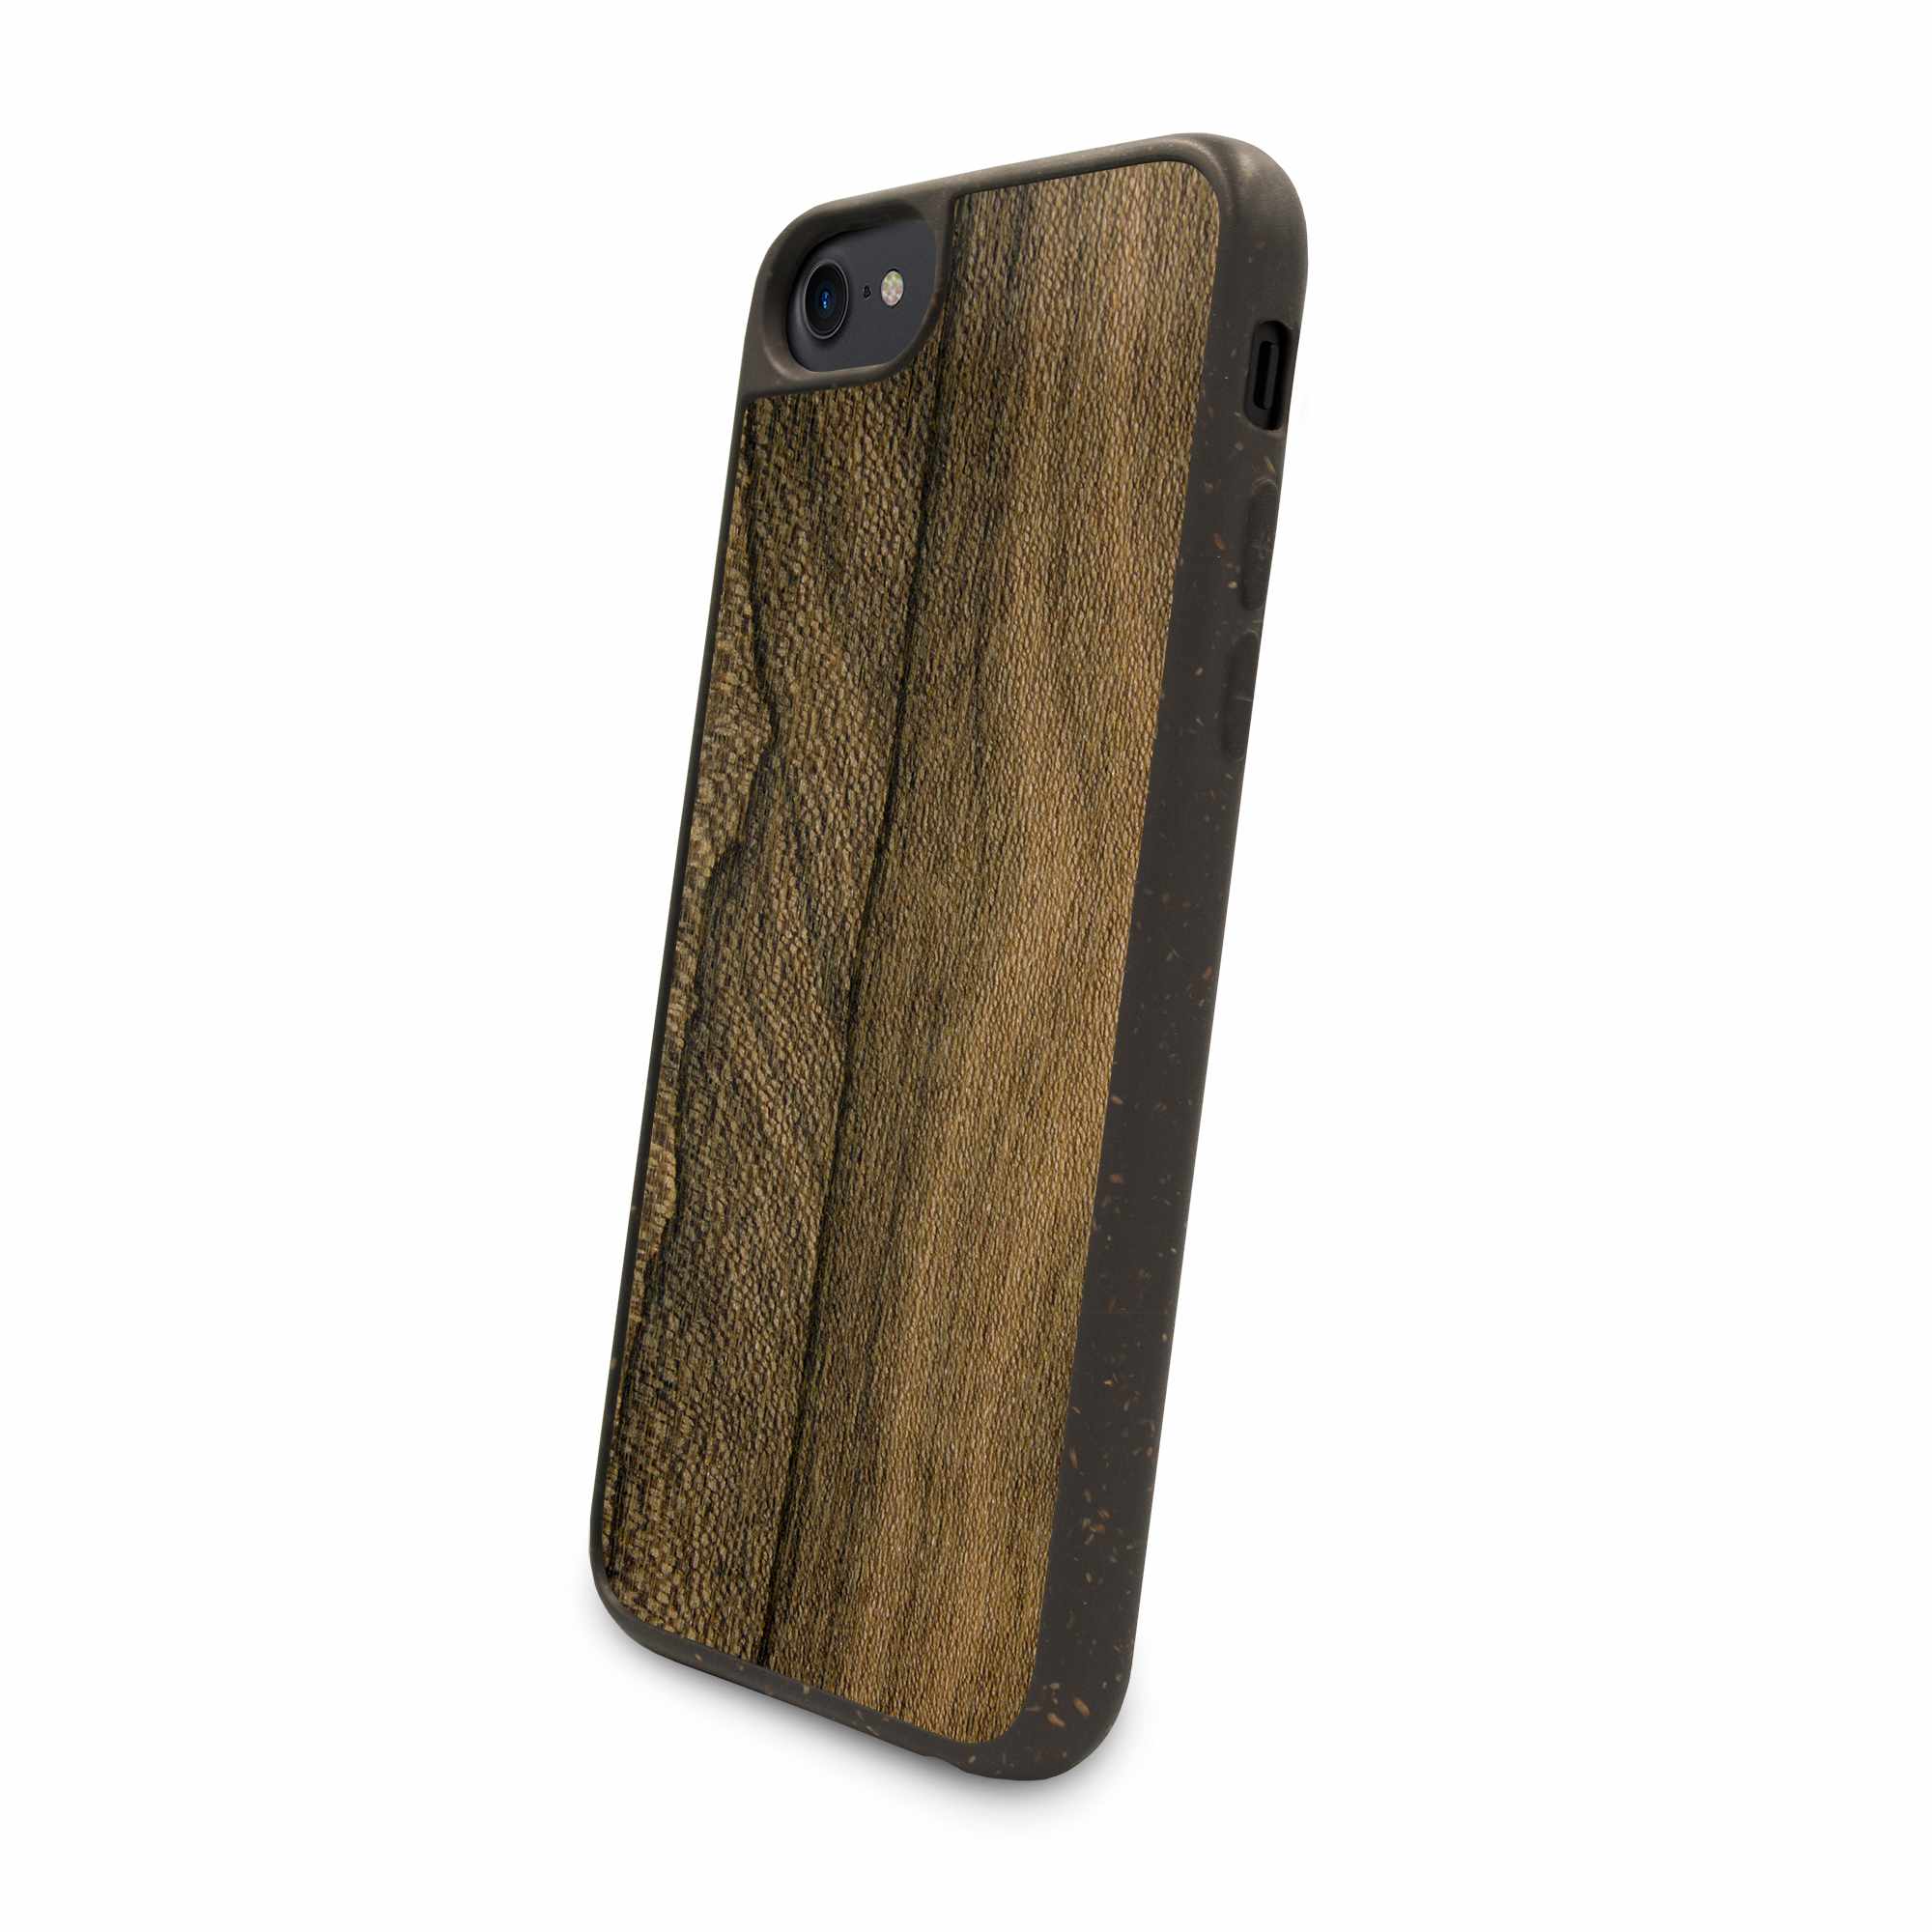 Biodegradable Ziricote Wood phone Case from side